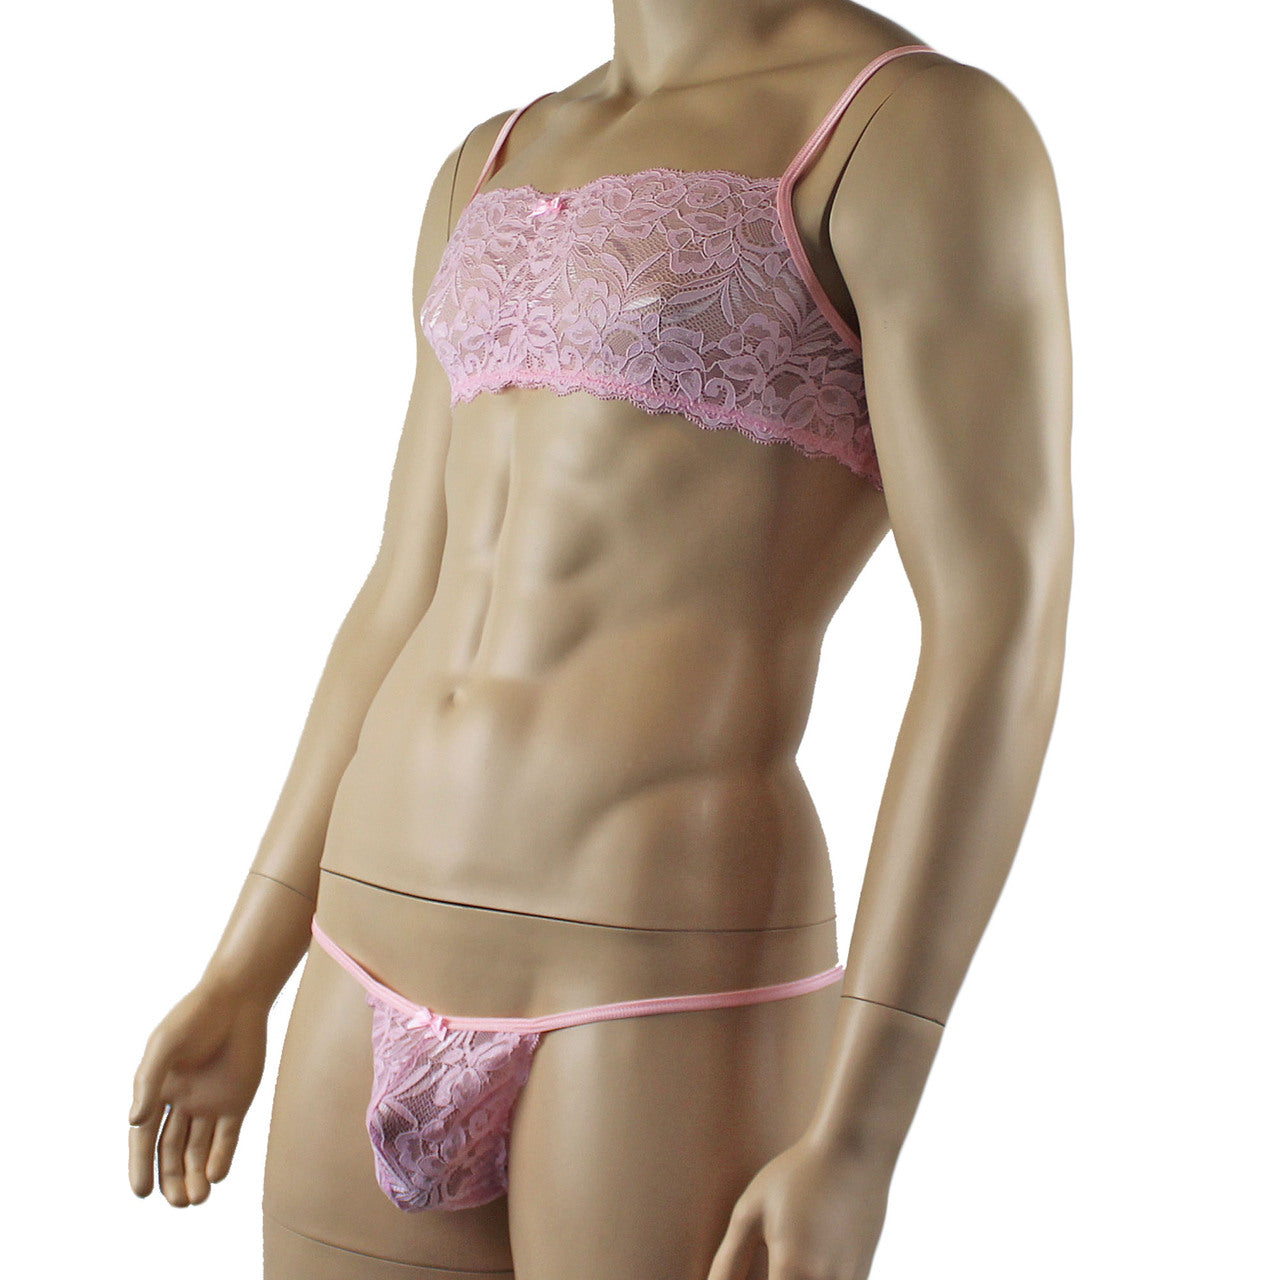 Mens Lingerie Bra Top and Pouch G string (light pink plus other colours)